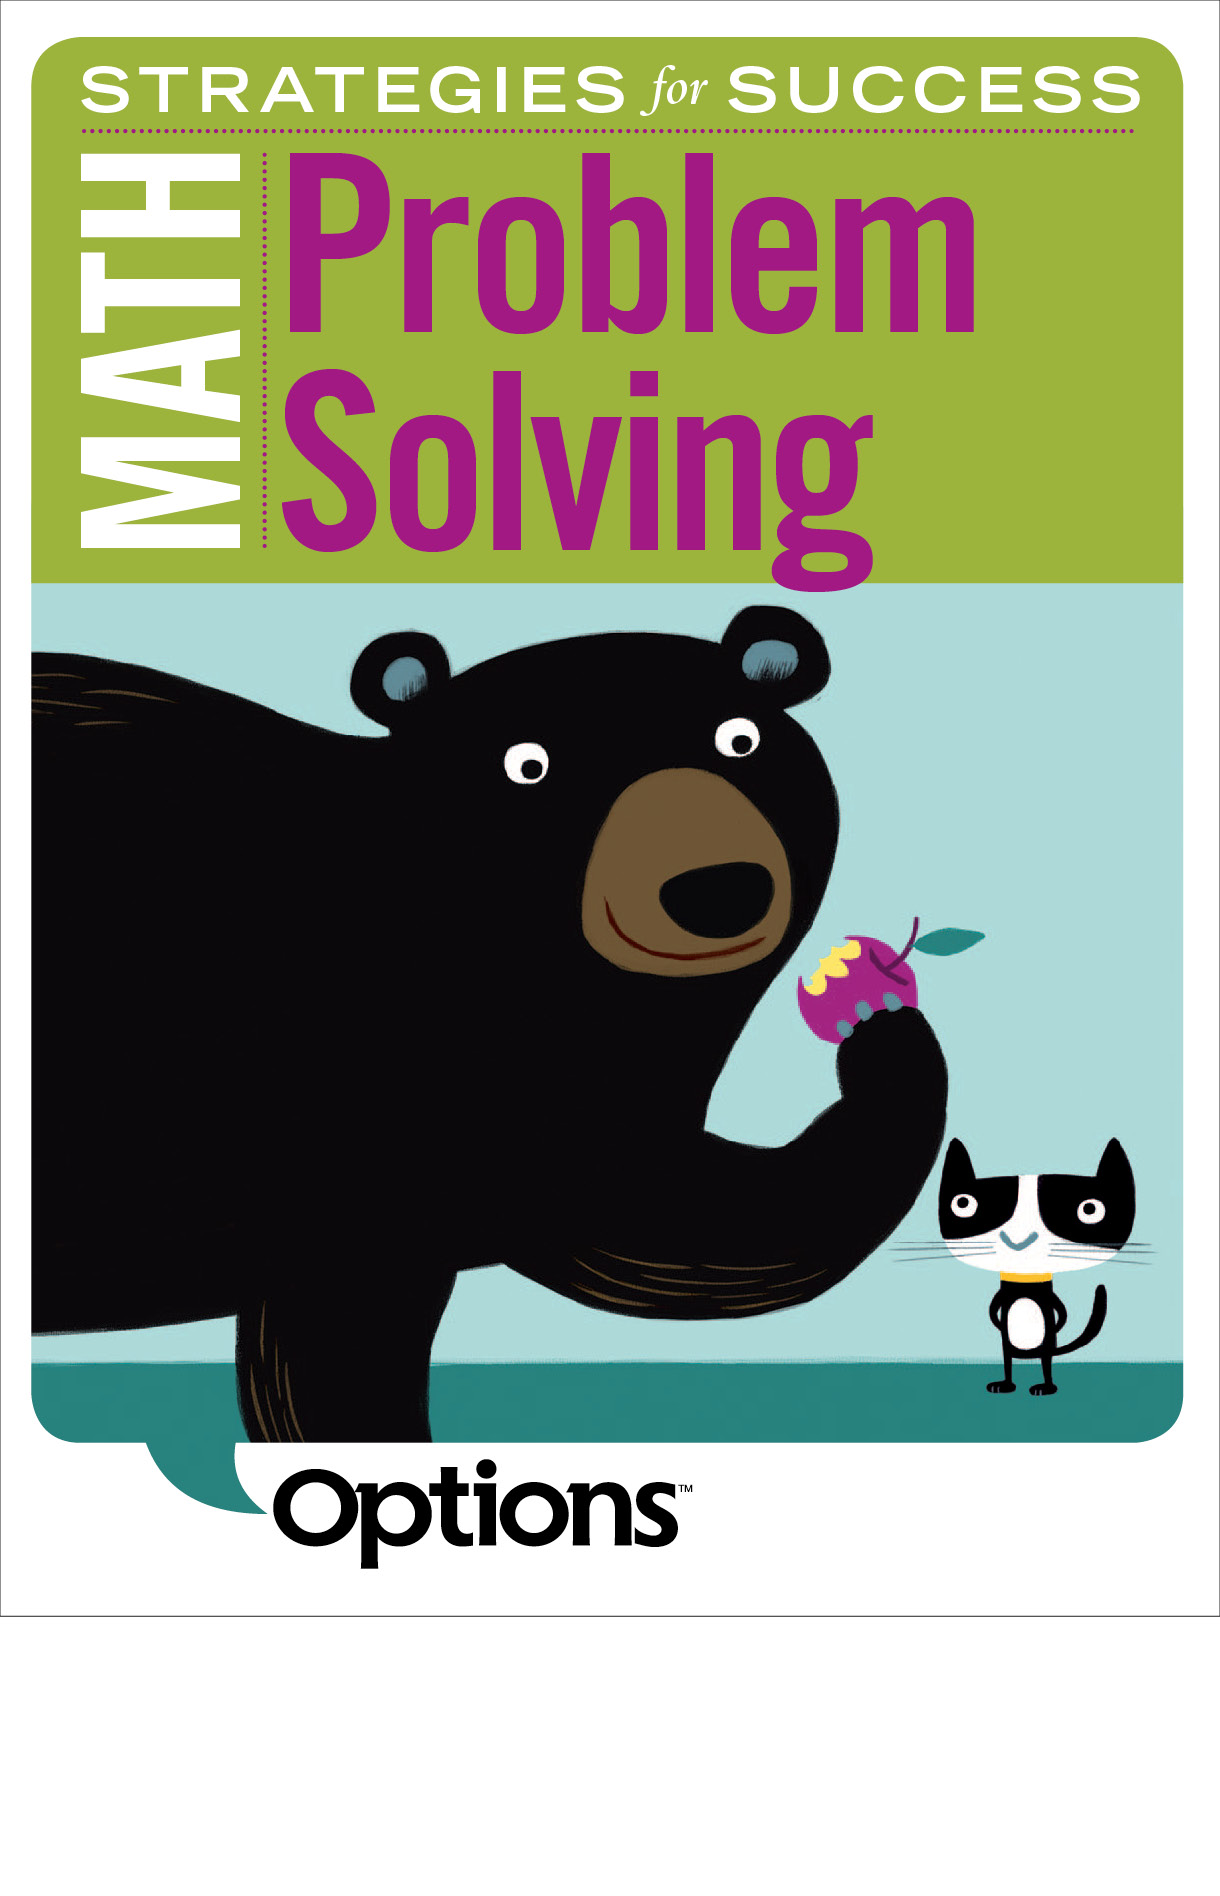 Book cover of Math Strategies for Success, Problem Solving. It has a bear eating a piece of fruit and a cat.